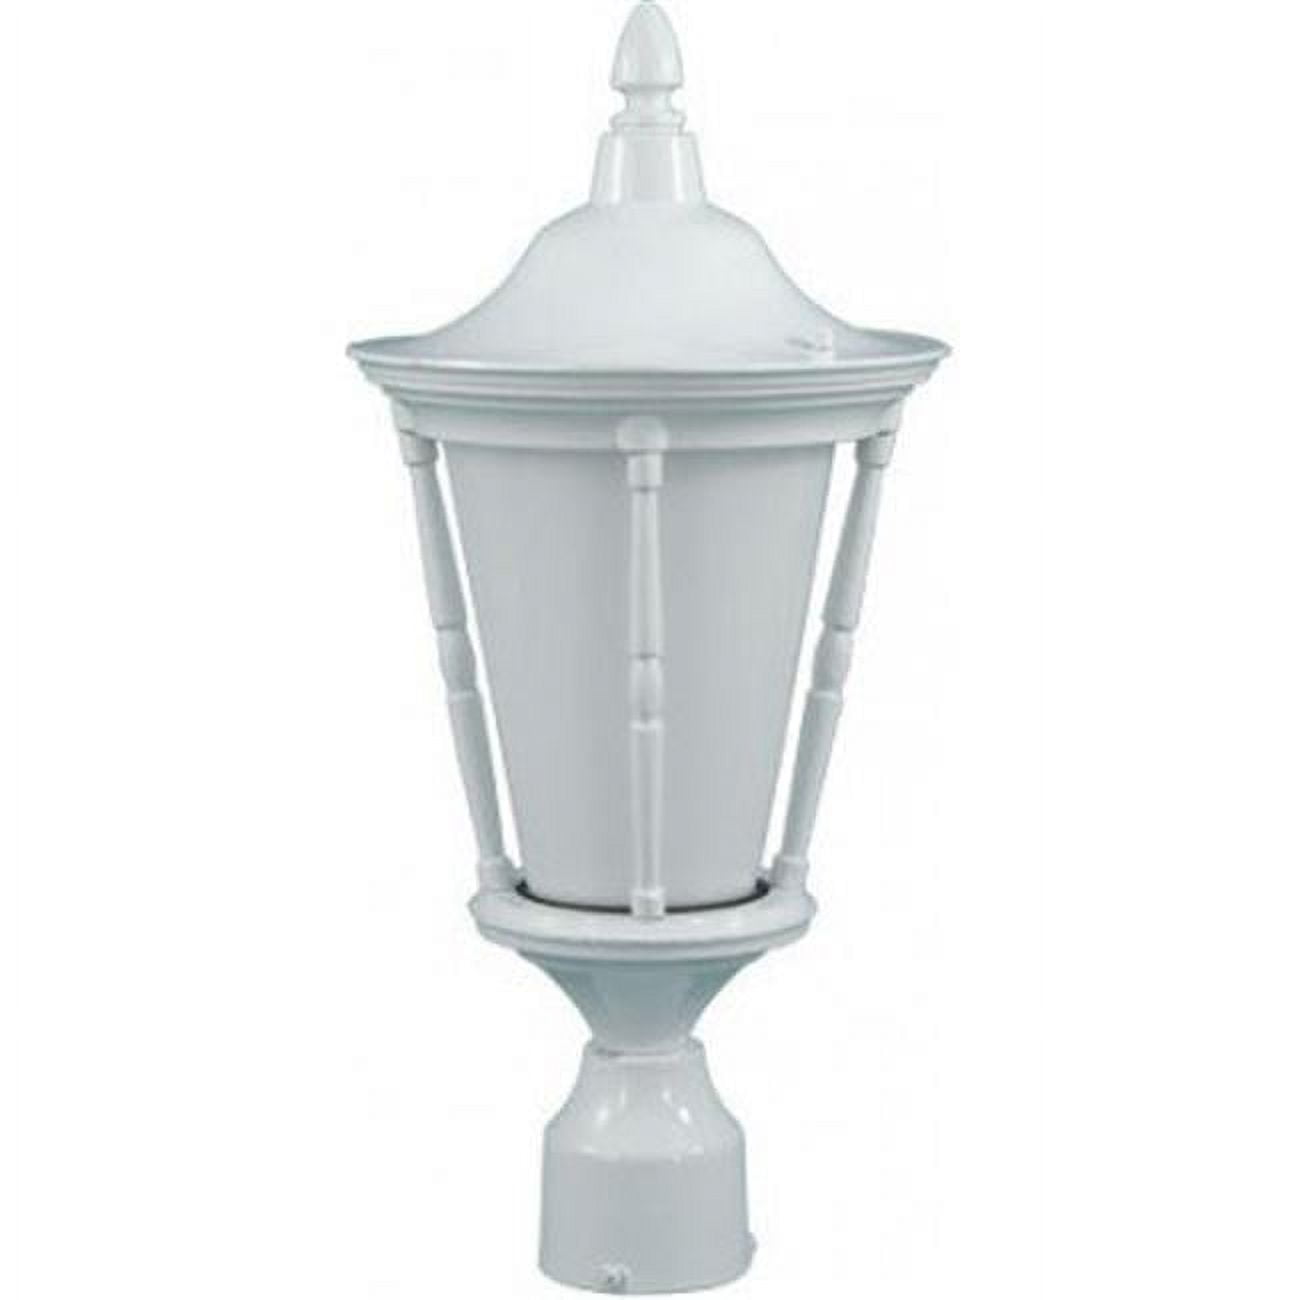 Picture of Dabmar Lighting GM112-LED16-W 16W & 85-265V LED Gabriella Post Top Light Fixture - White